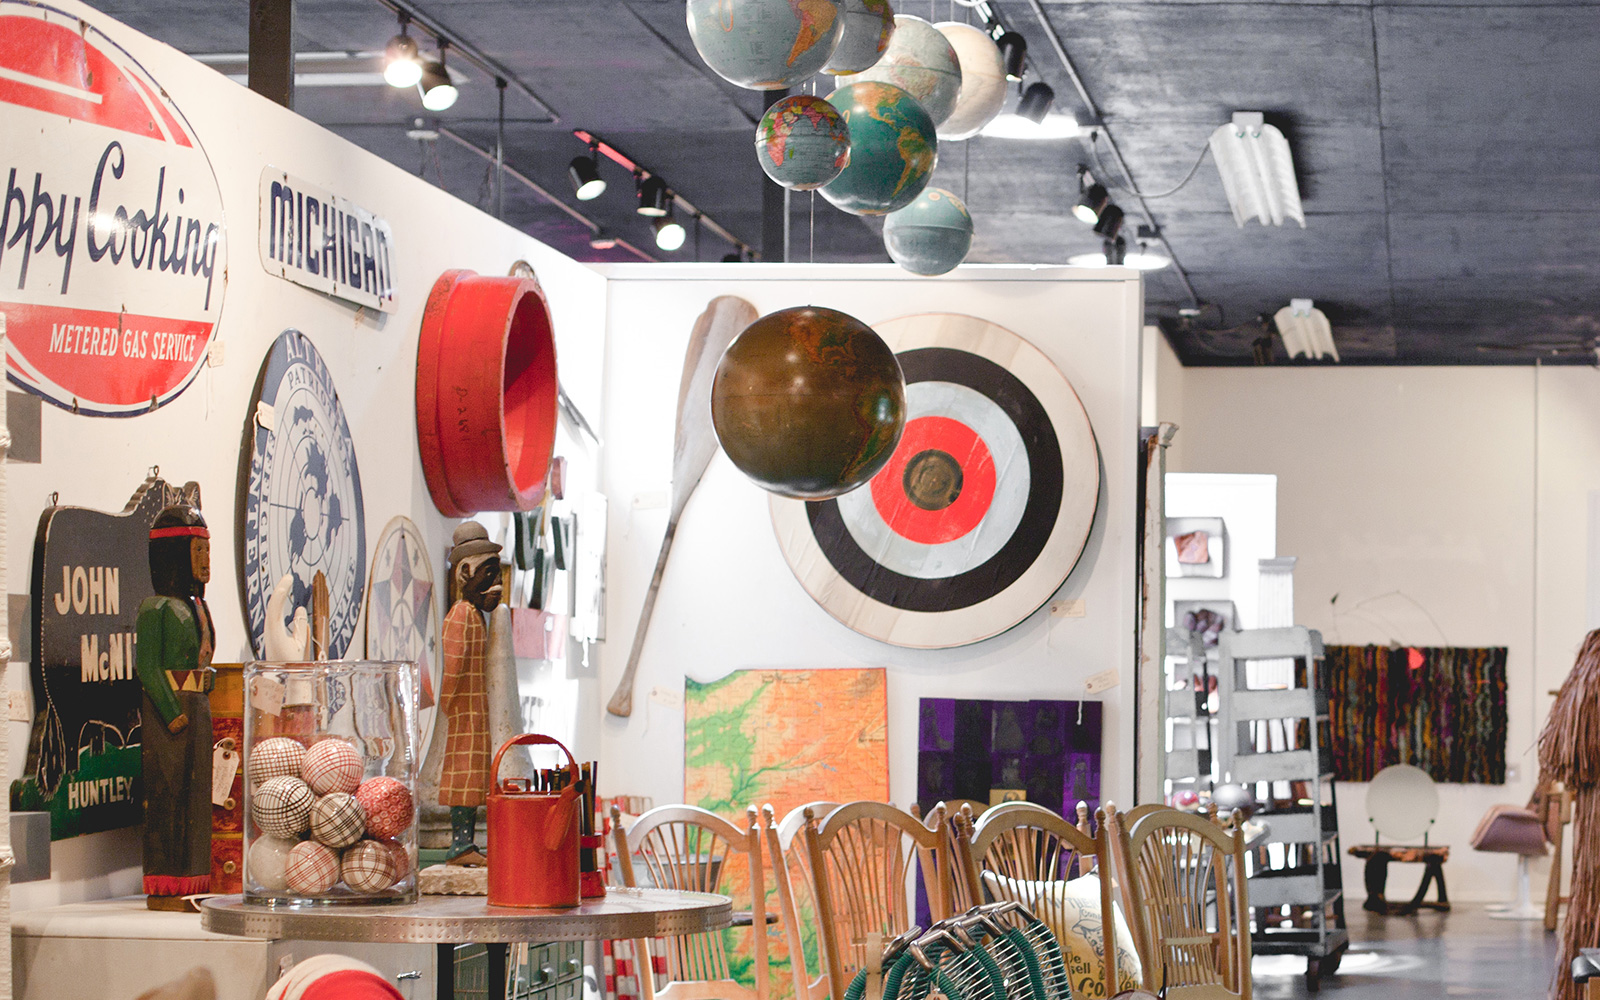 a curated antiques store with wood chairs, globes hanging from the cealing, vintage signs and more